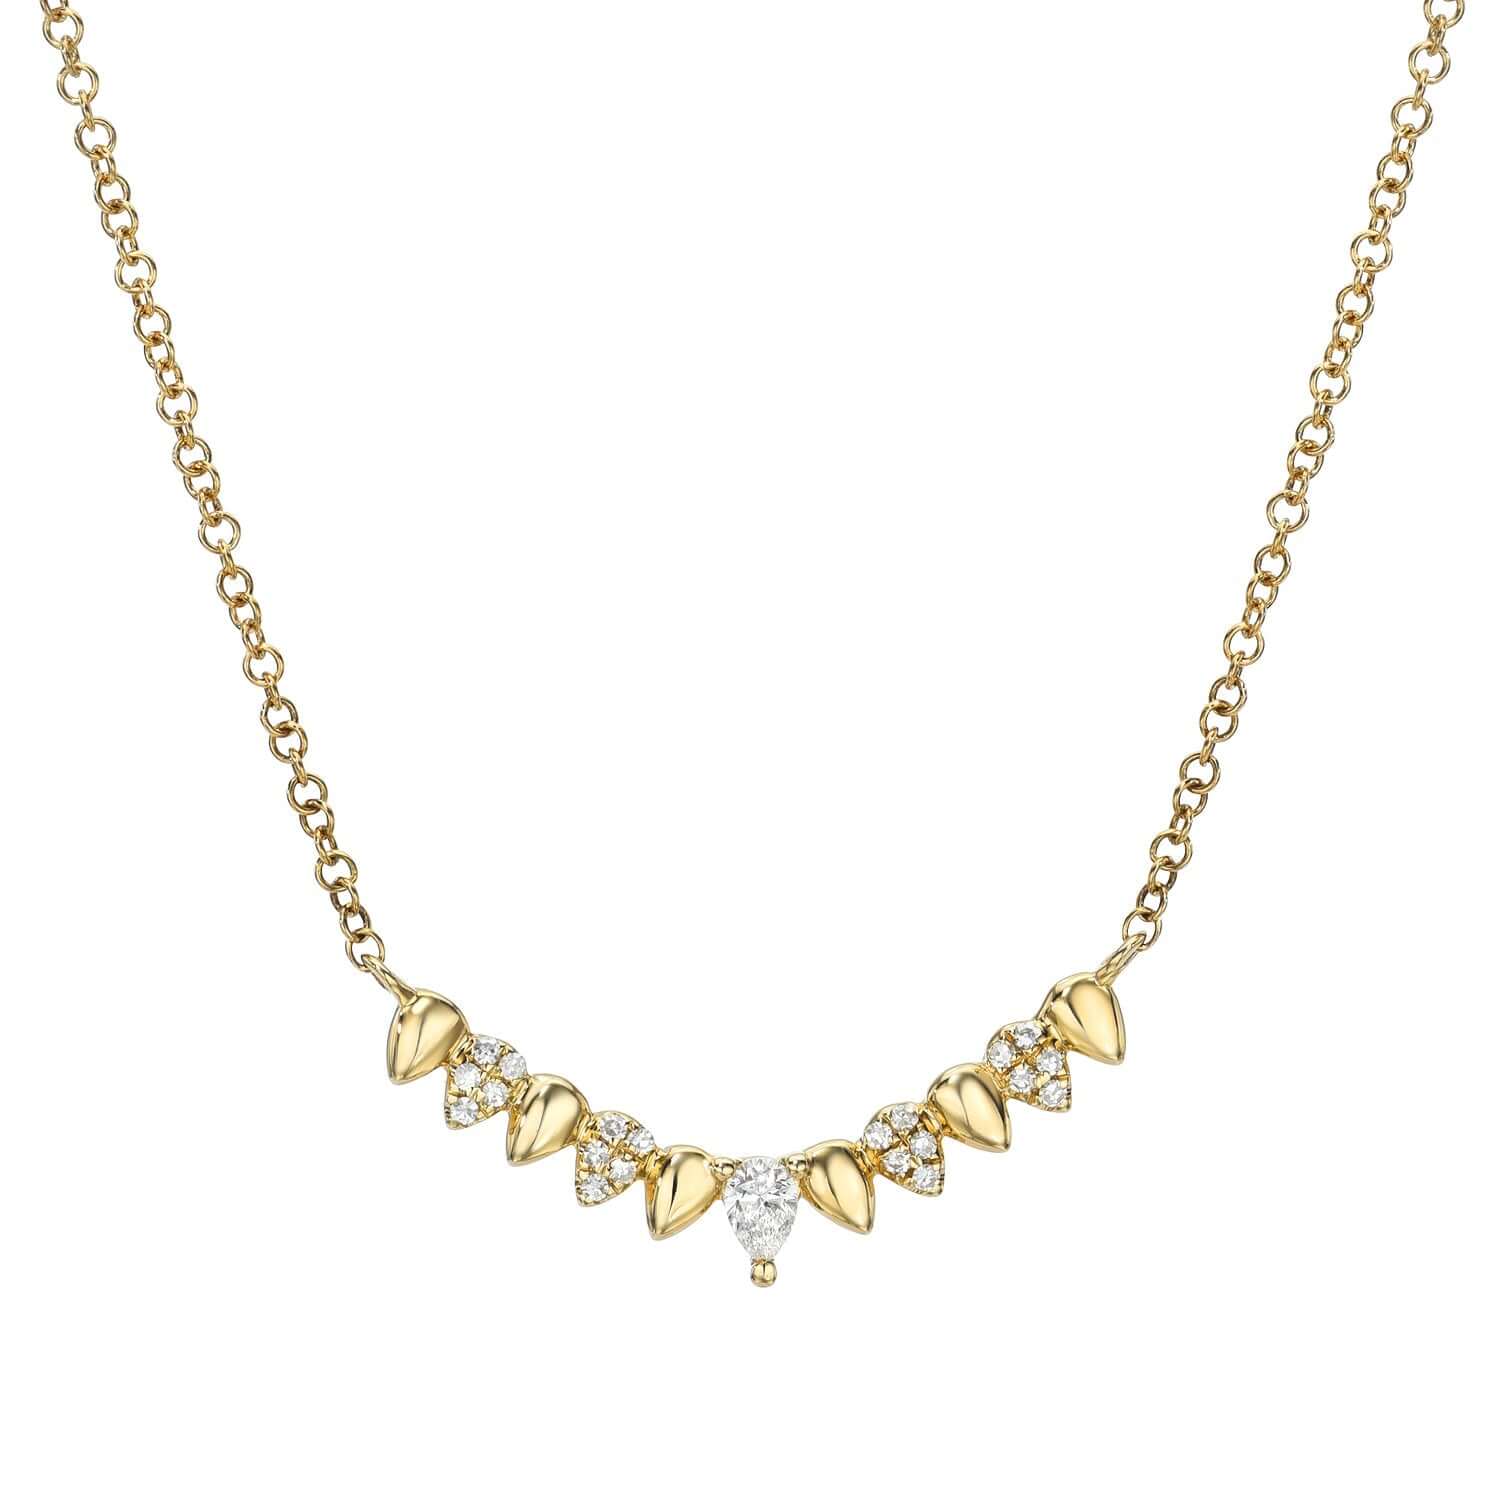 Alternating Pear Shaped Graduated Necklace